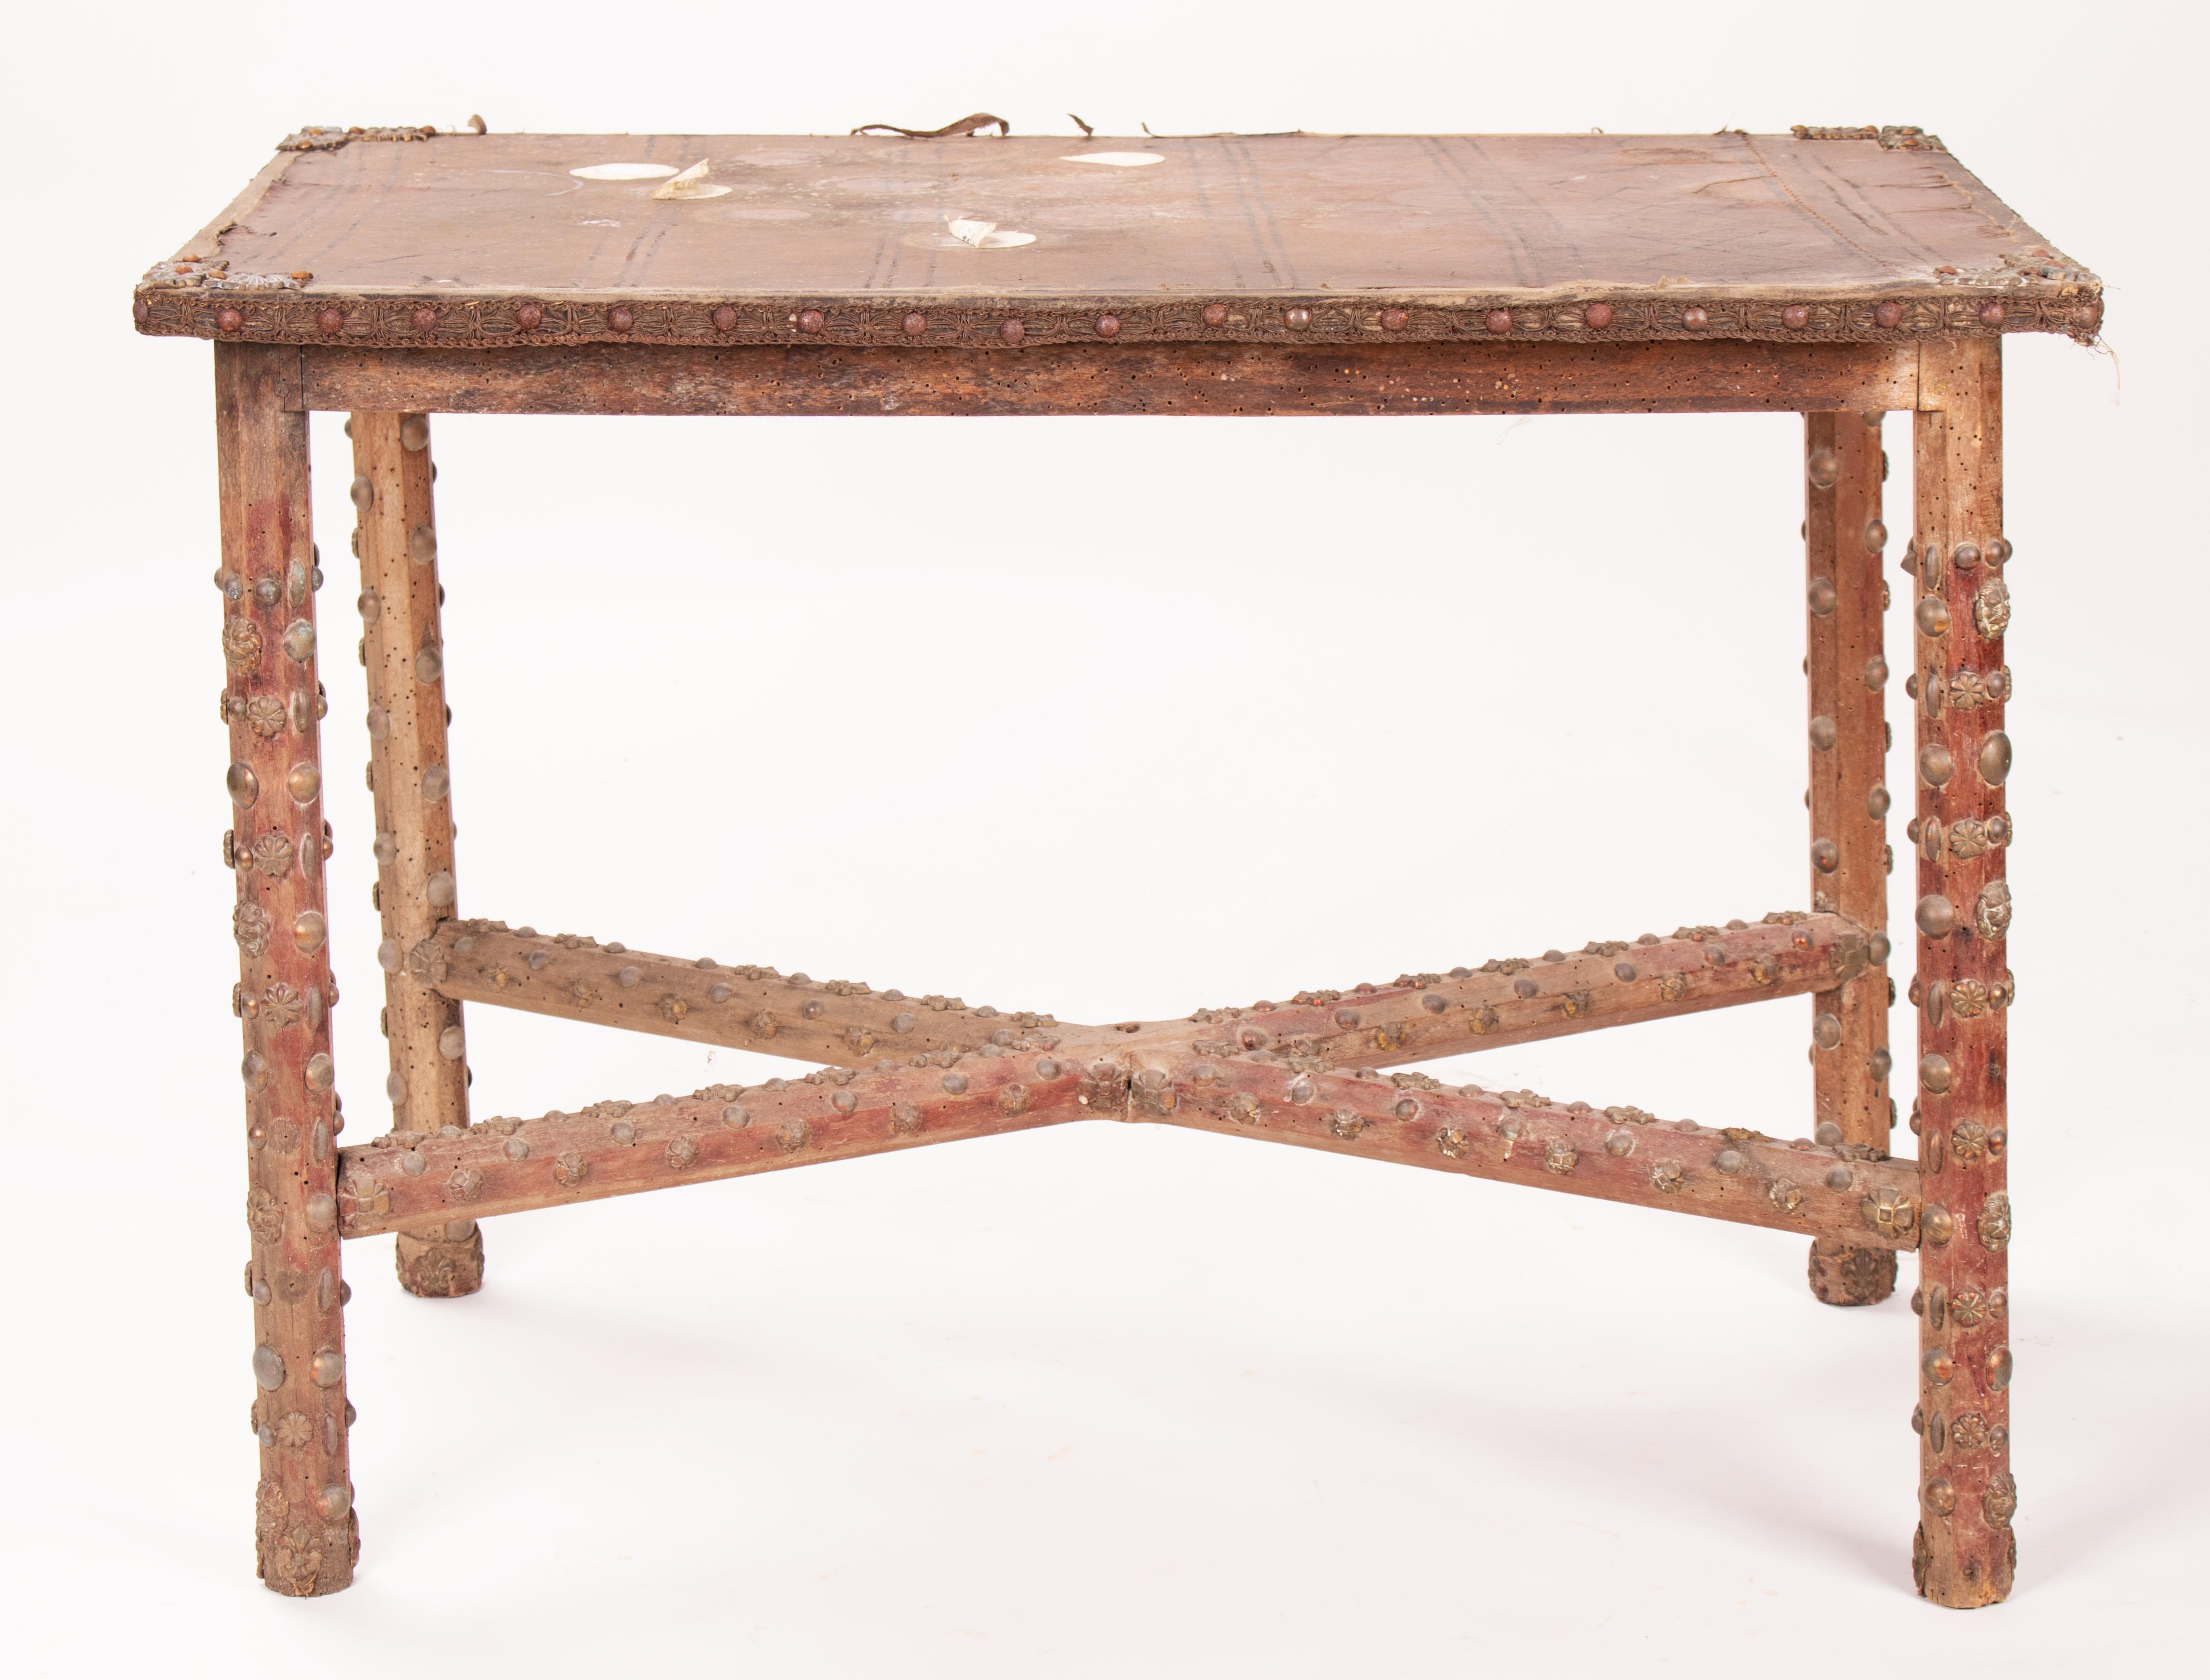 19th Century French Leather Top Wooden Table with Fleur-de-lis Nailhead Trim For Sale 3